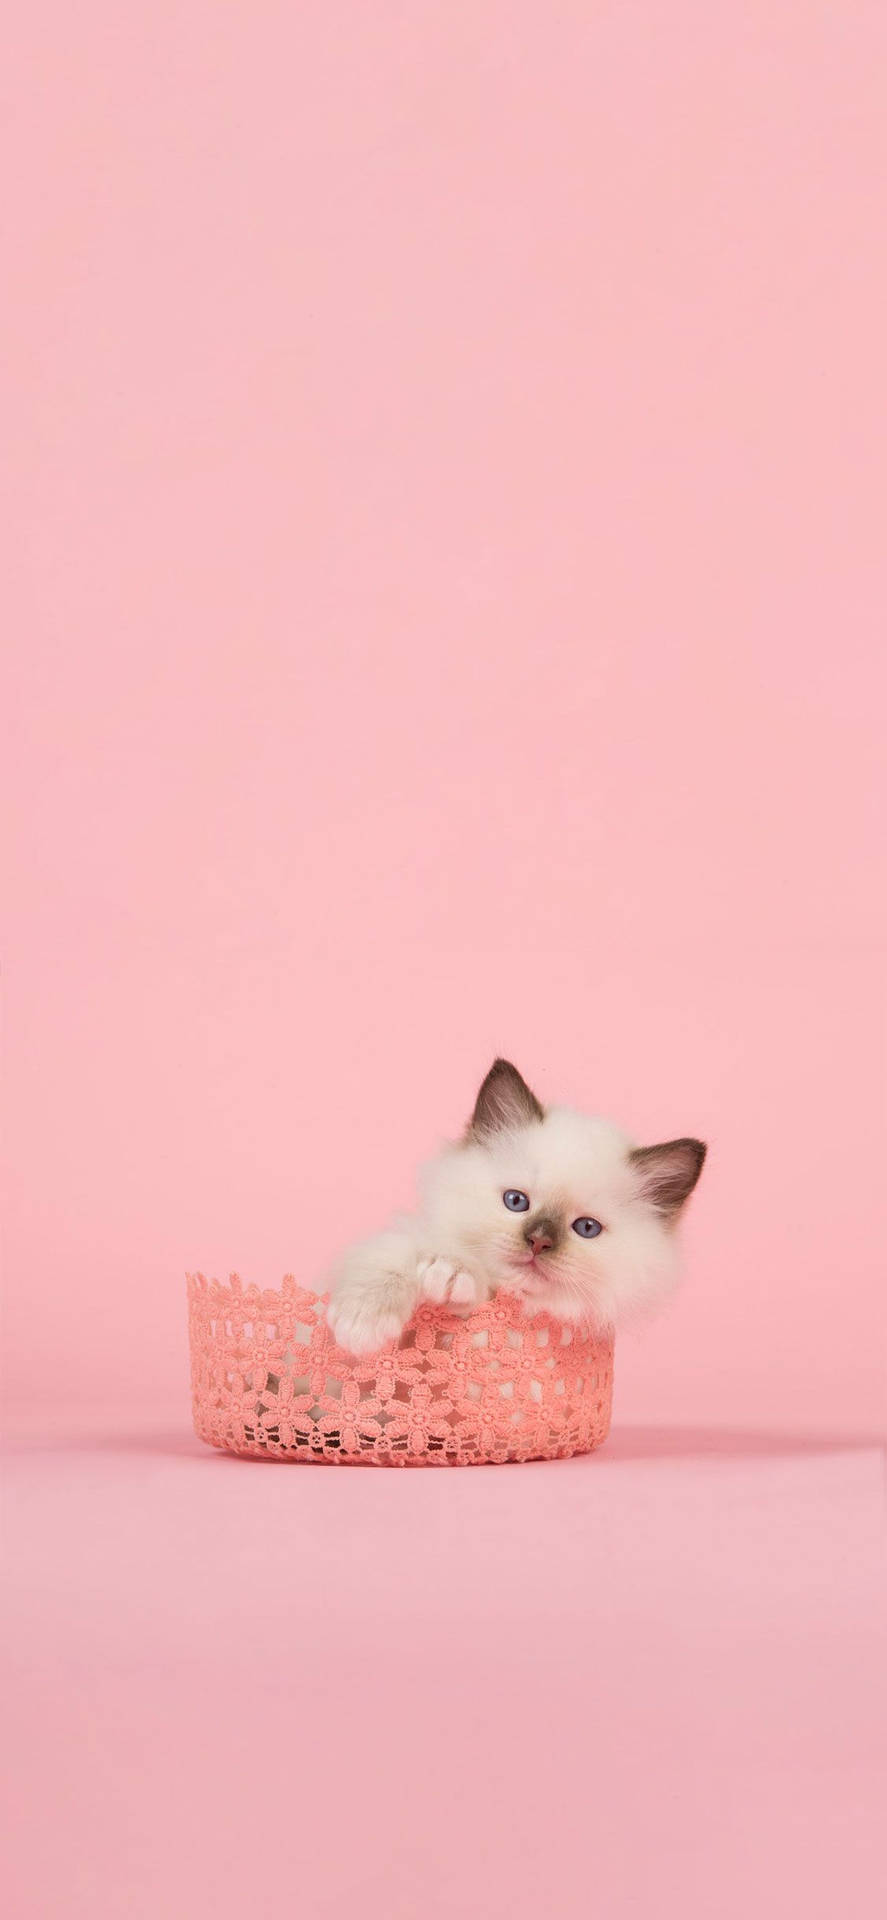 Look at this adorable pink cat! Wallpaper